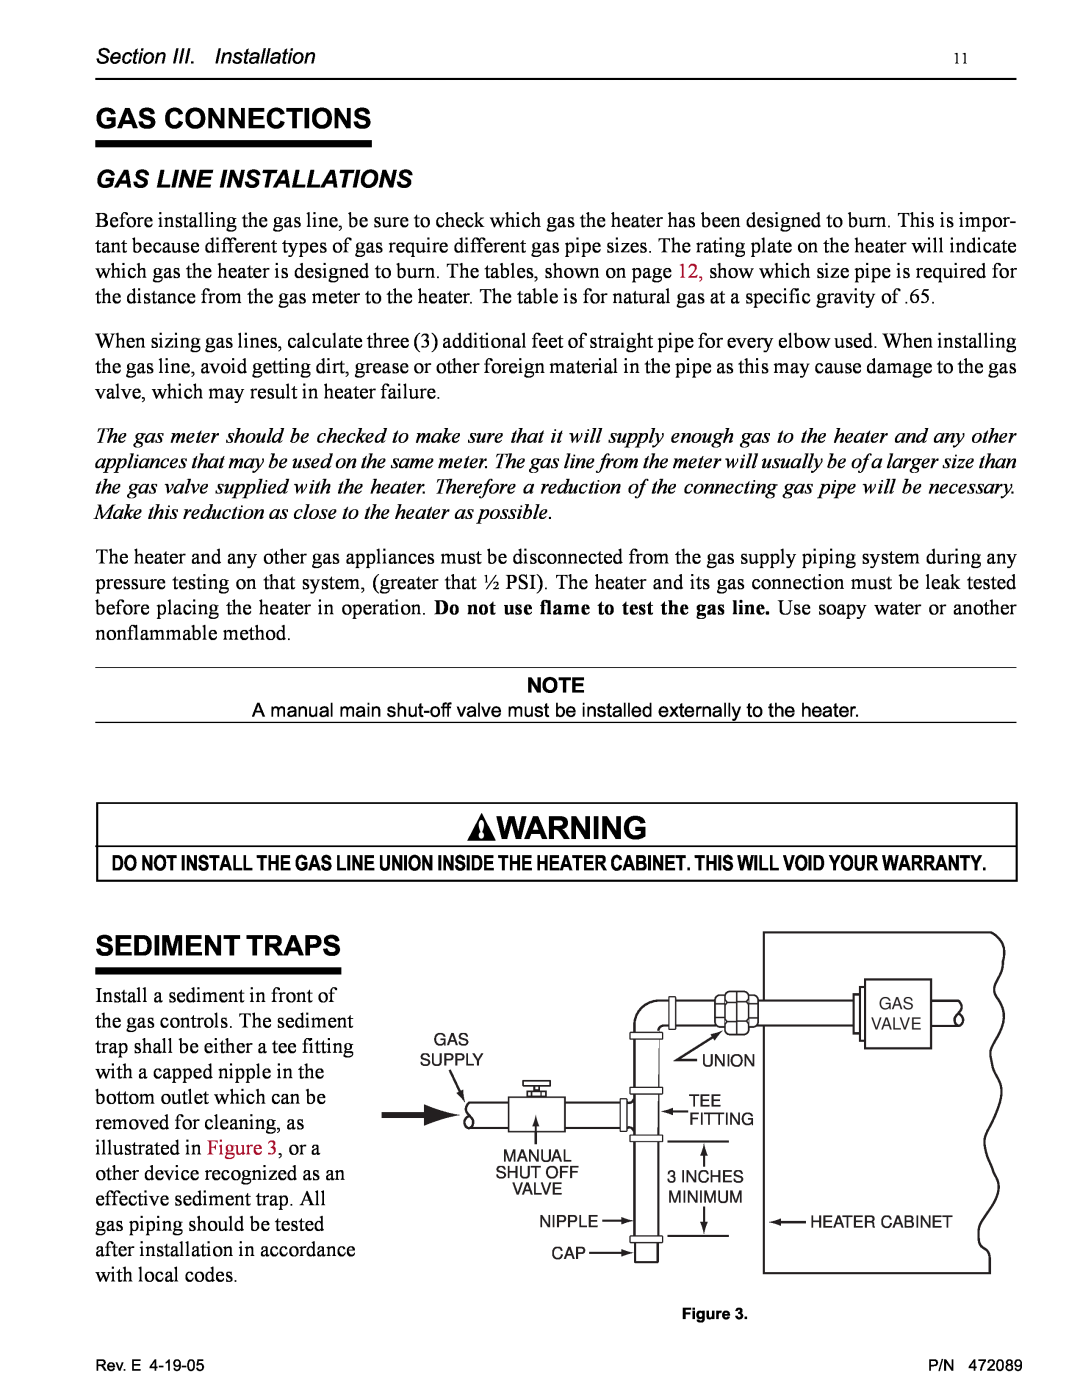 Pentair MiniMax NT LN installation manual Gas Connections, Sediment Traps, Gas Line Installations 